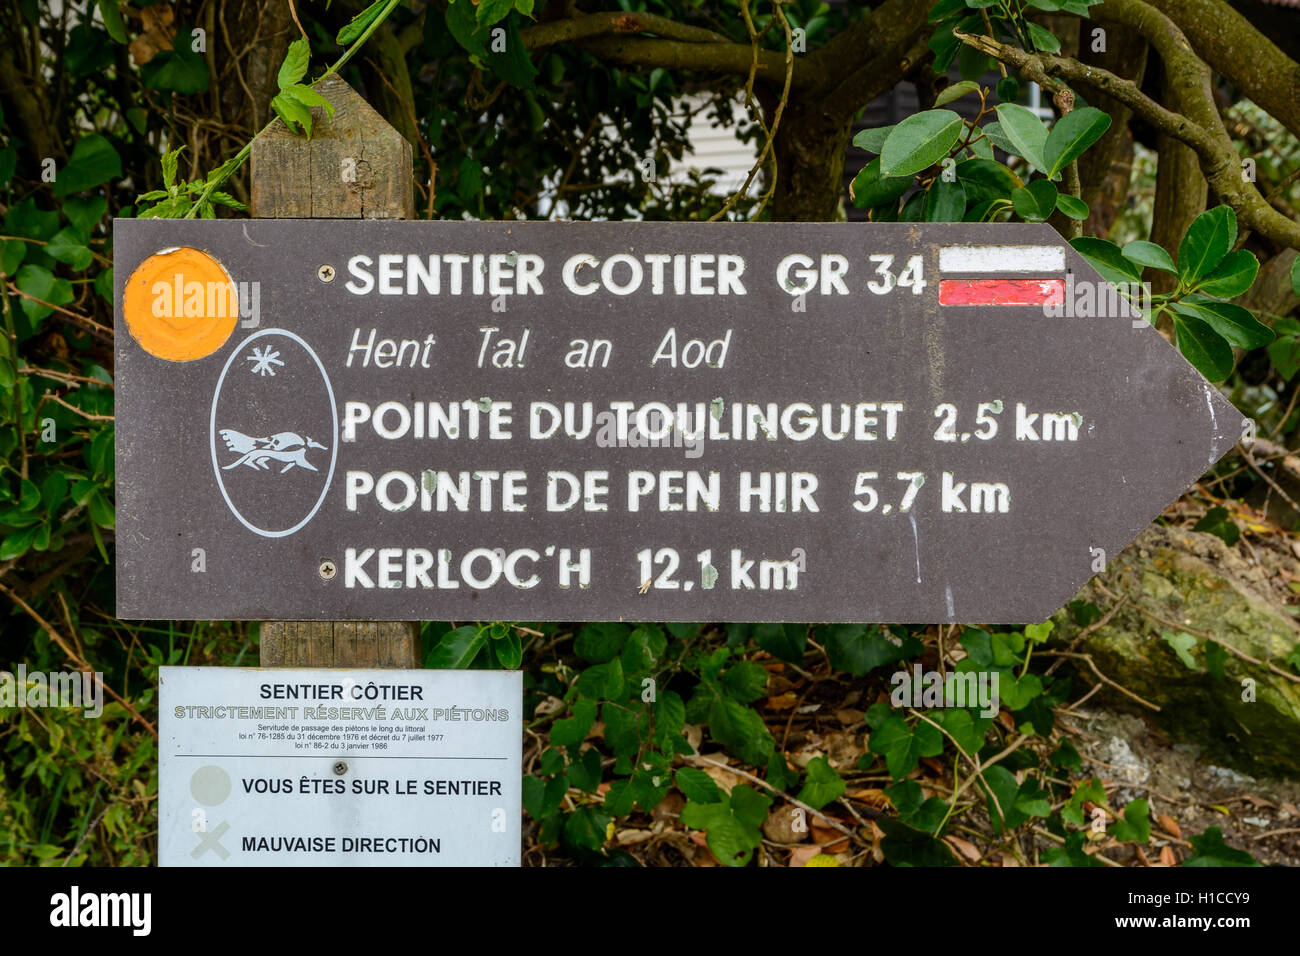 GR34 Sentier cotier trail along the coast in Britanny, France Stock Photo